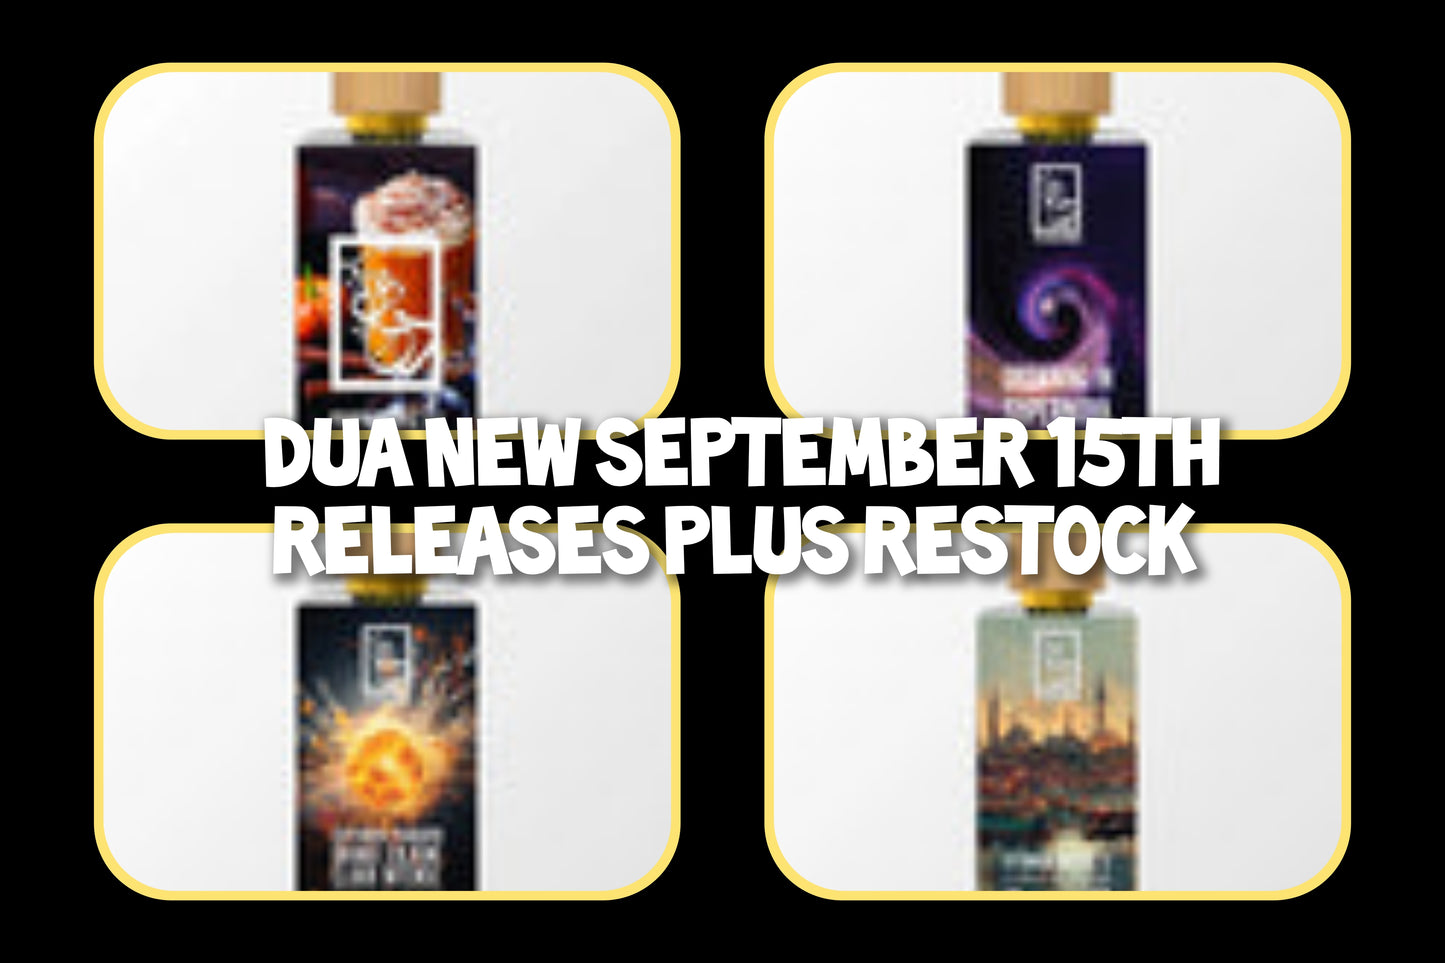 Dua September 15th New releases and restock